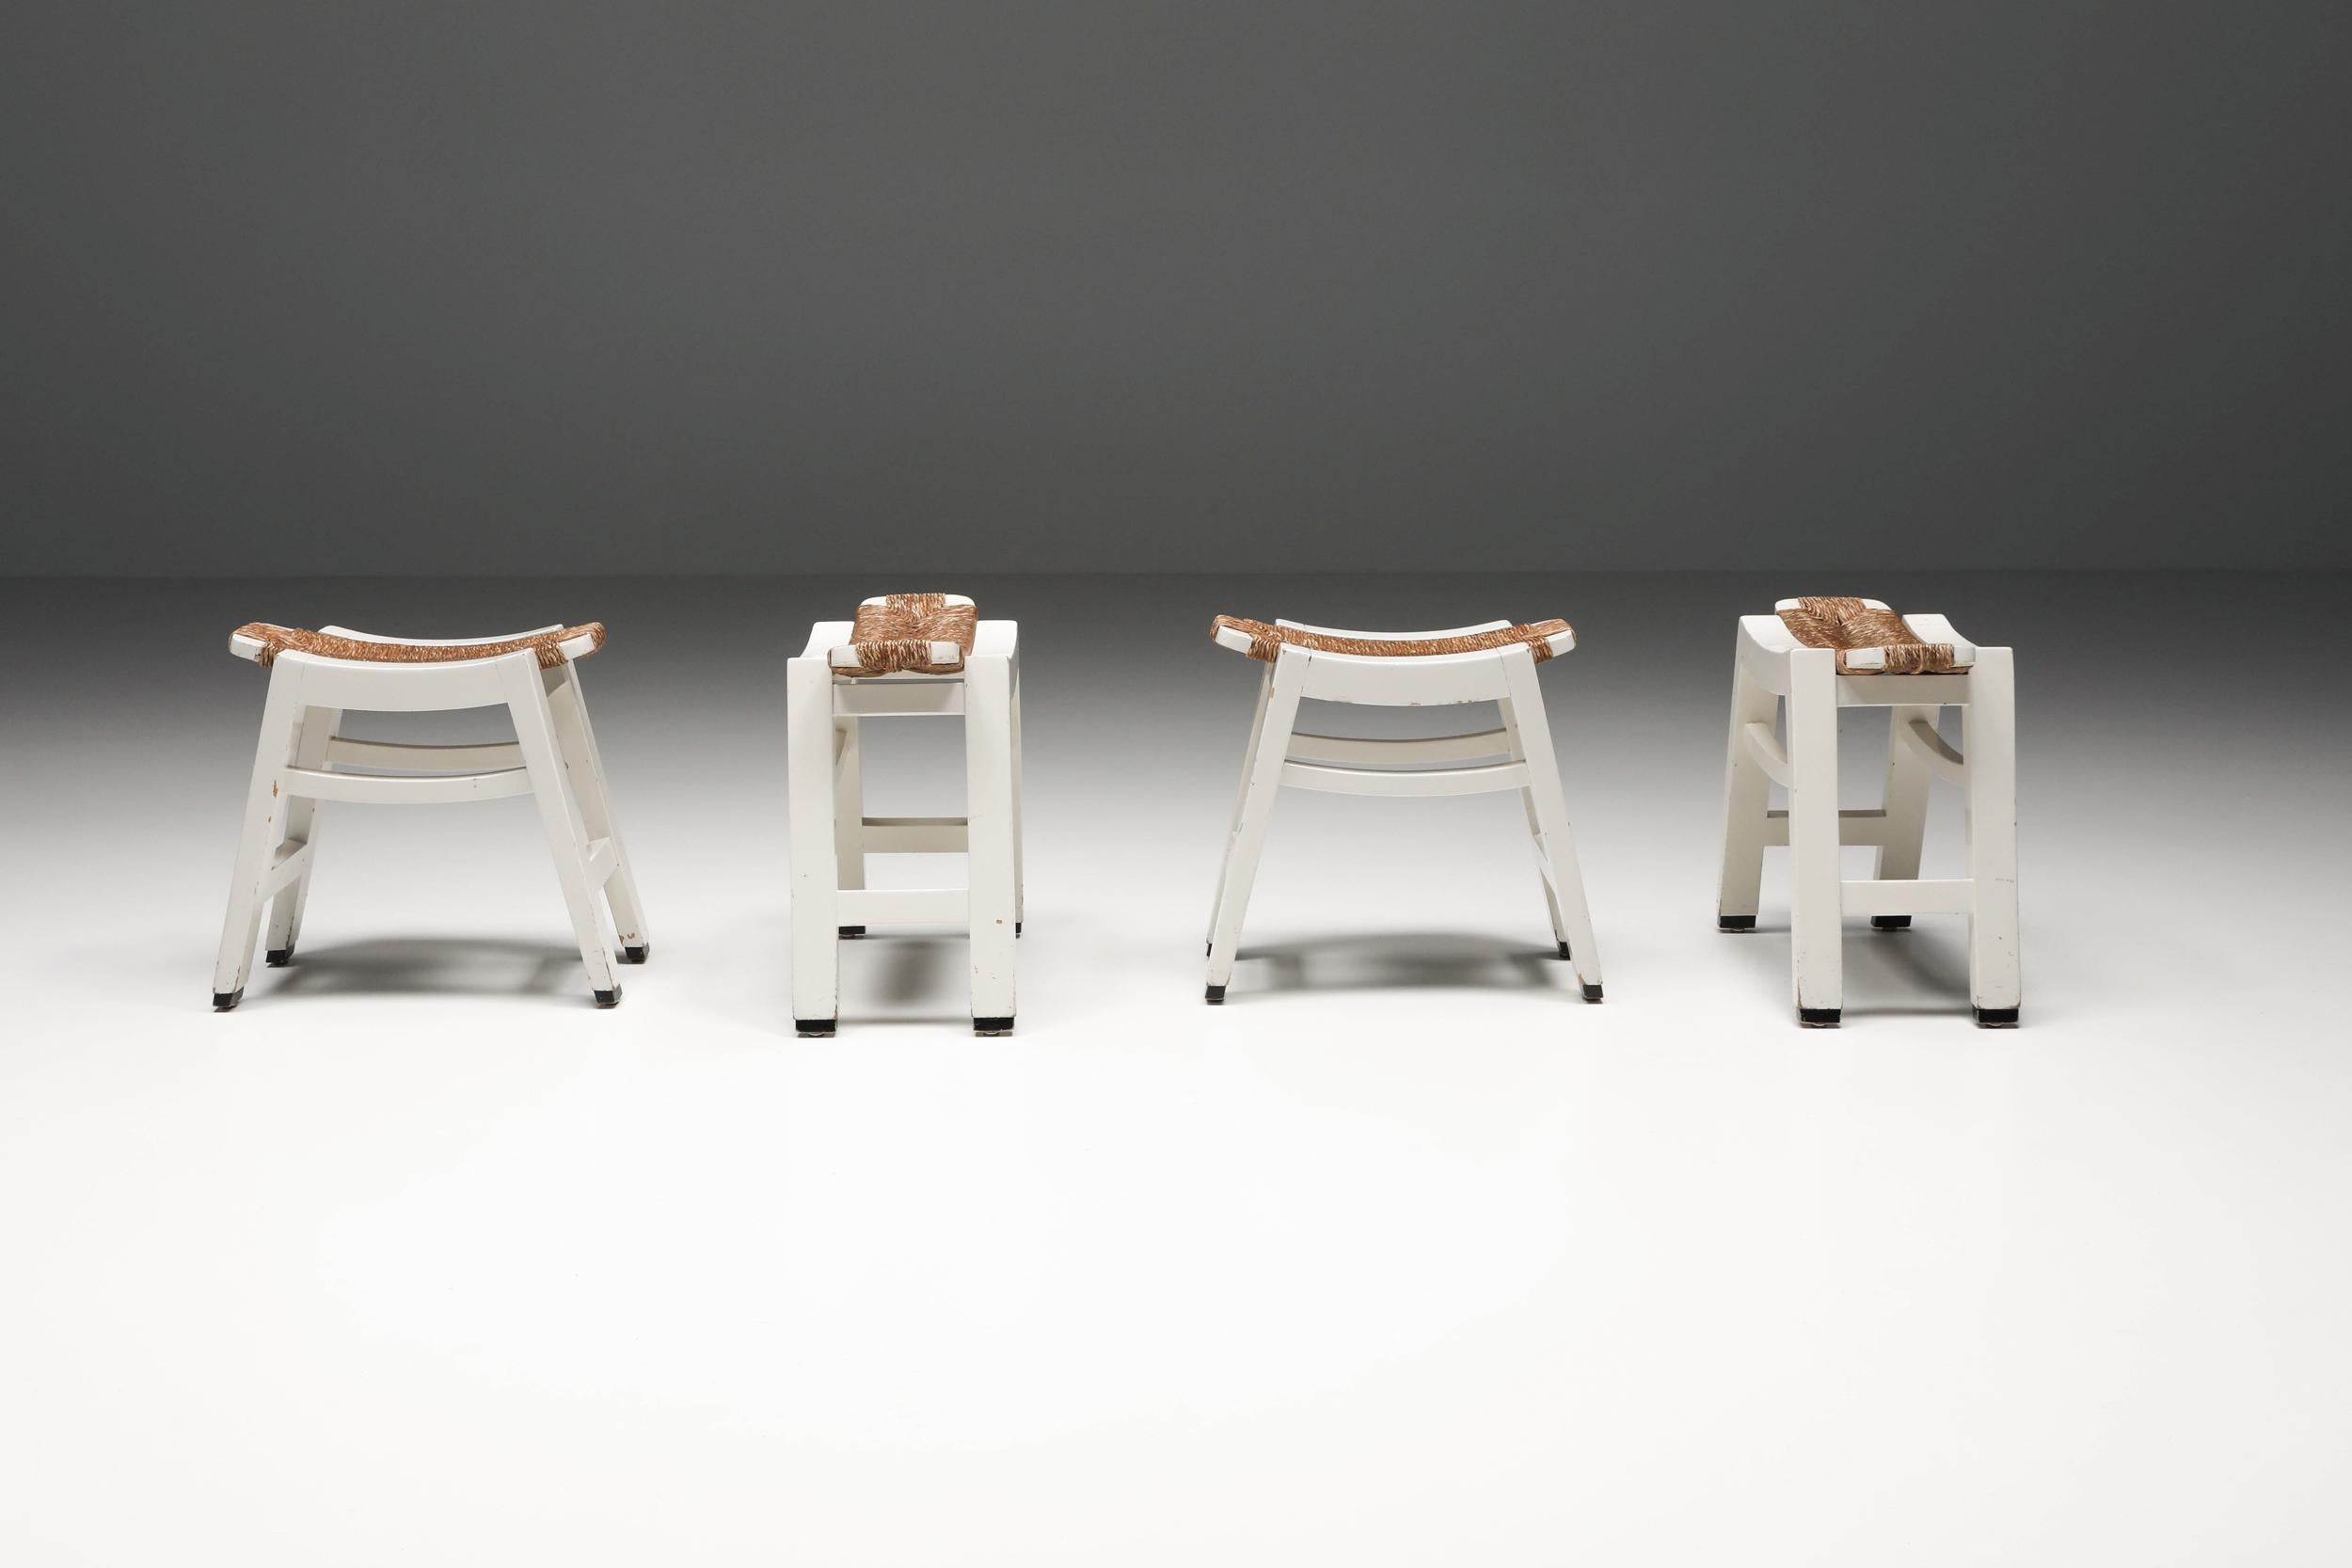 Set of four exquisite Dutch design white wooden stools with woven rush seating, artfully crafted in the style inspired by W. Kuyper. These stools present a captivating contrast, where the warm, earthy texture of brown rush seamlessly harmonizes with